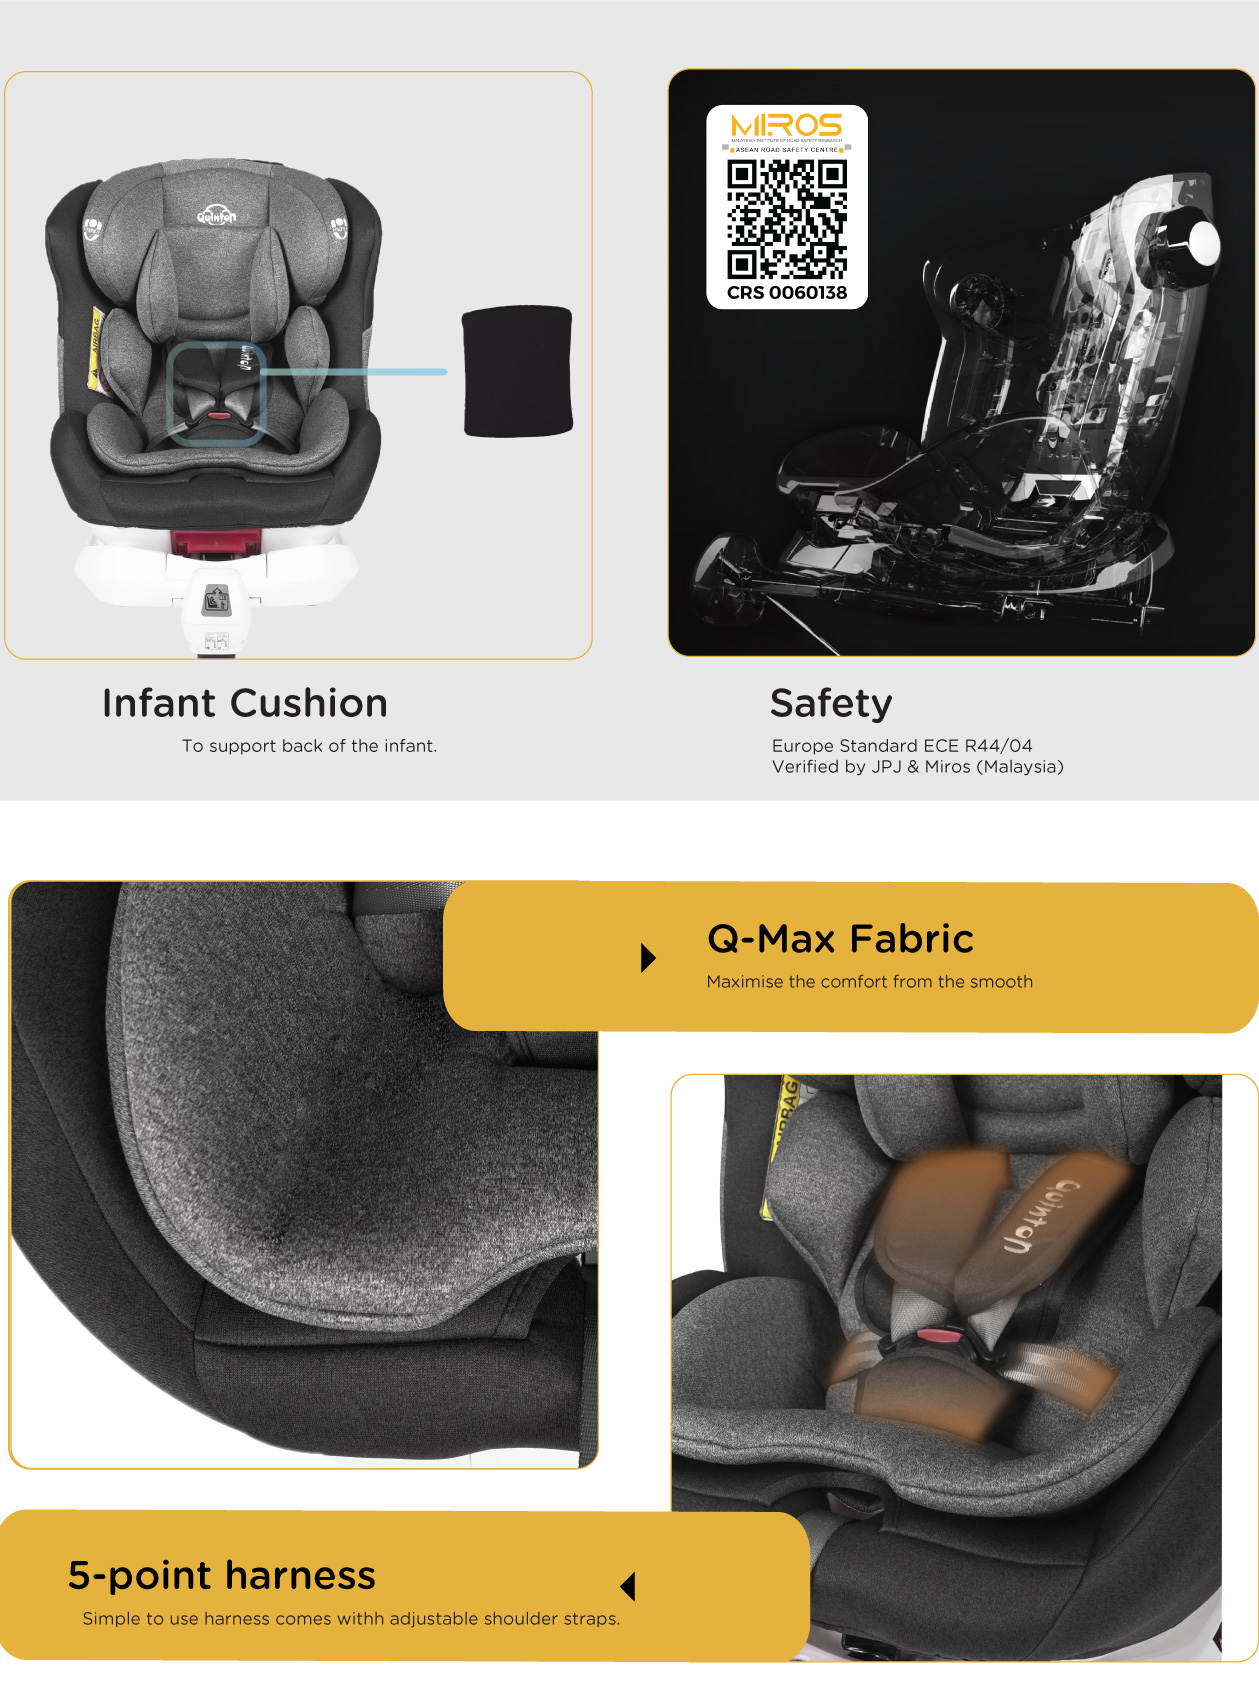 quinton baby one spin 360 rotating convertible safety car seat 宝宝儿童汽车安全座椅